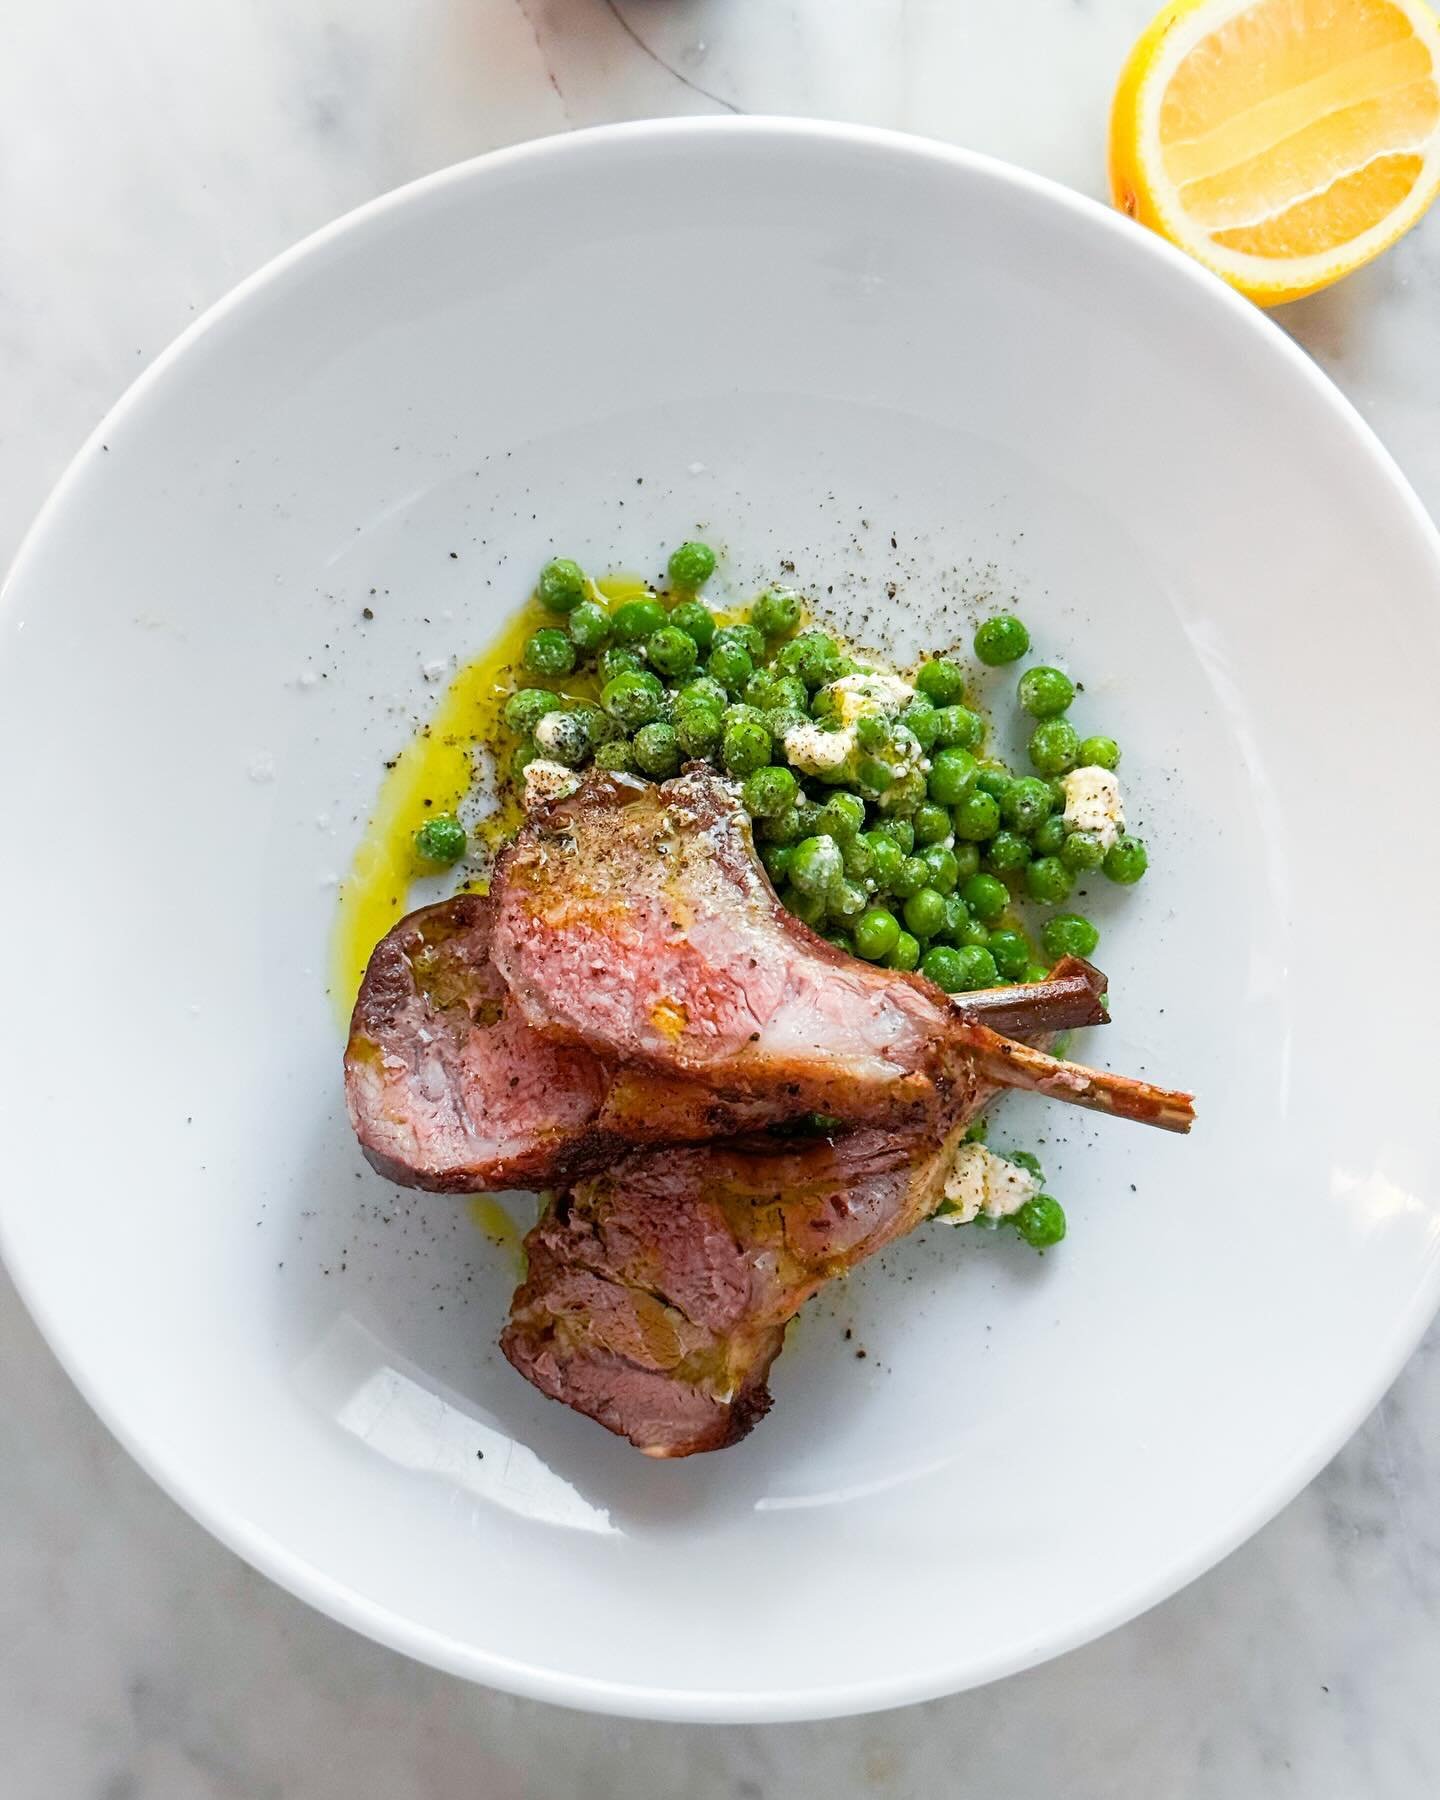 Shoot loot lamb and easy pea mint feta salad. 
Great for whatever day it is. 

#enotwlamb